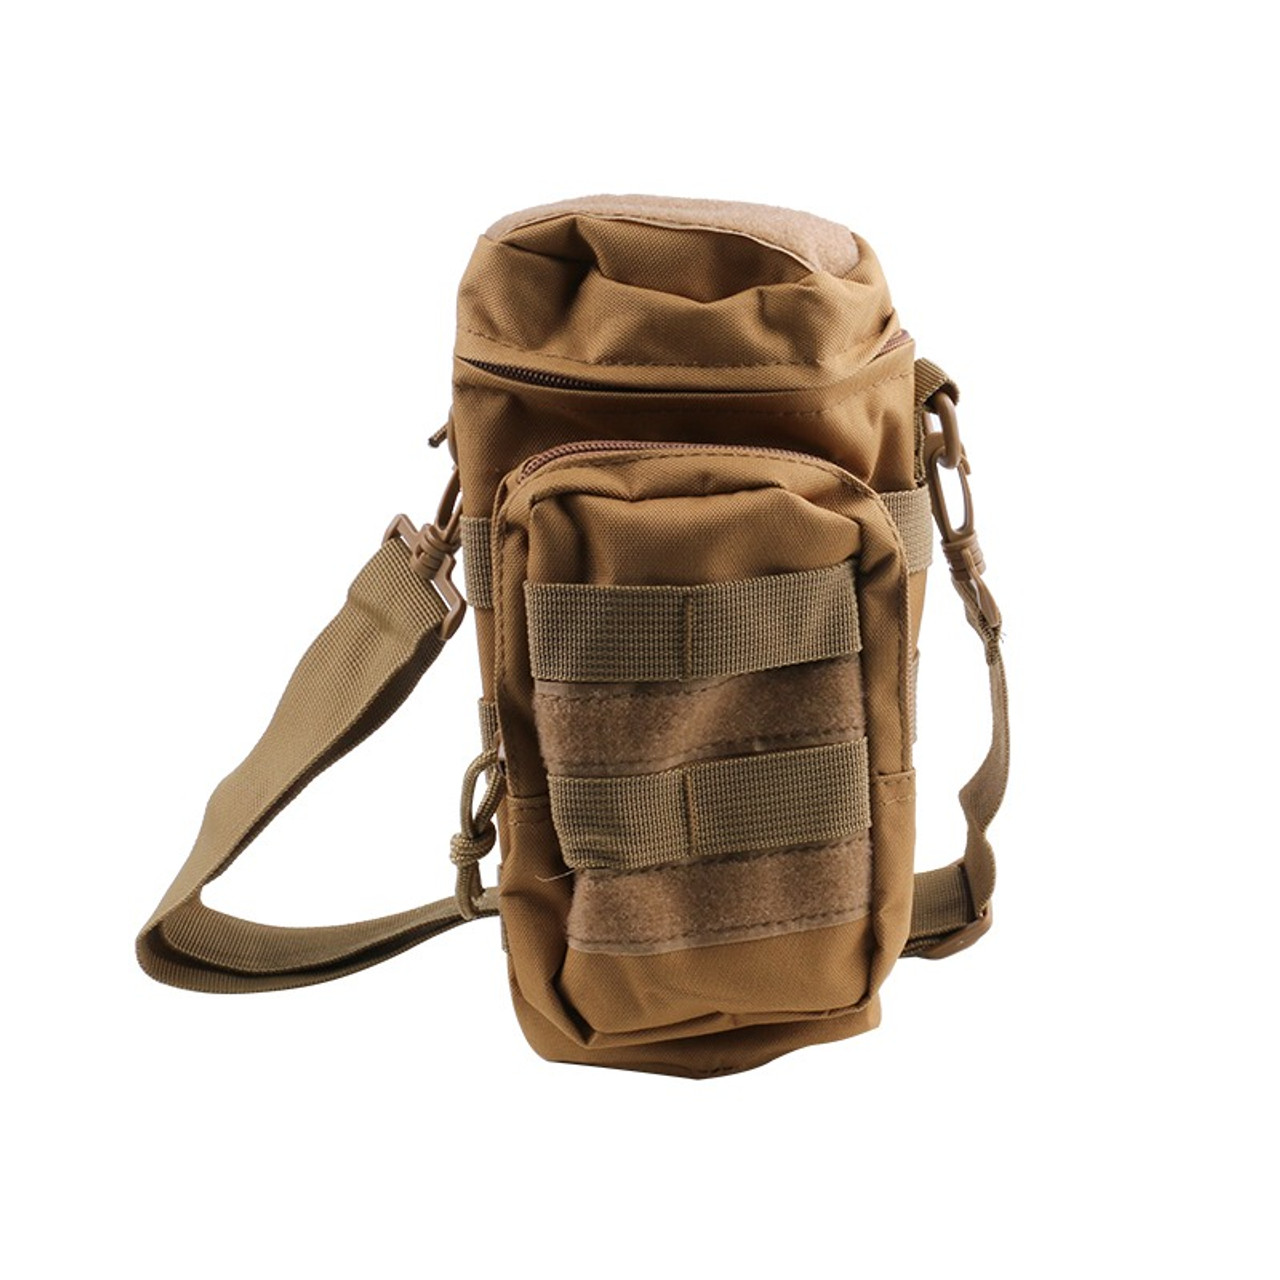 Tactical Water Bottle Holder Hydration Carrier Bag Molle water